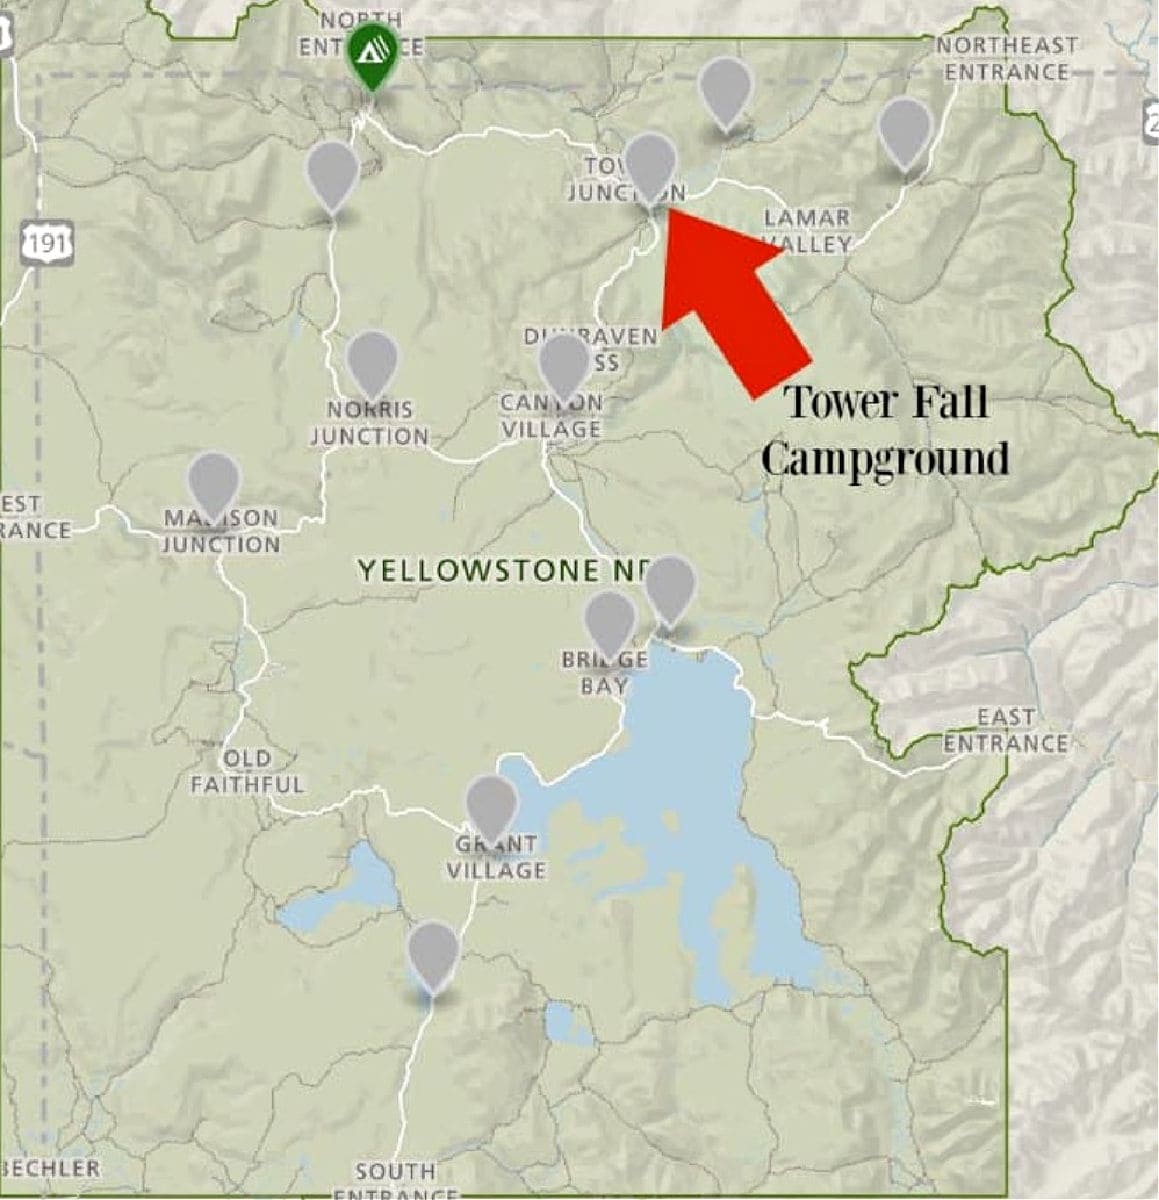 Location of Tower Fall Campground in Yellowstone National Park